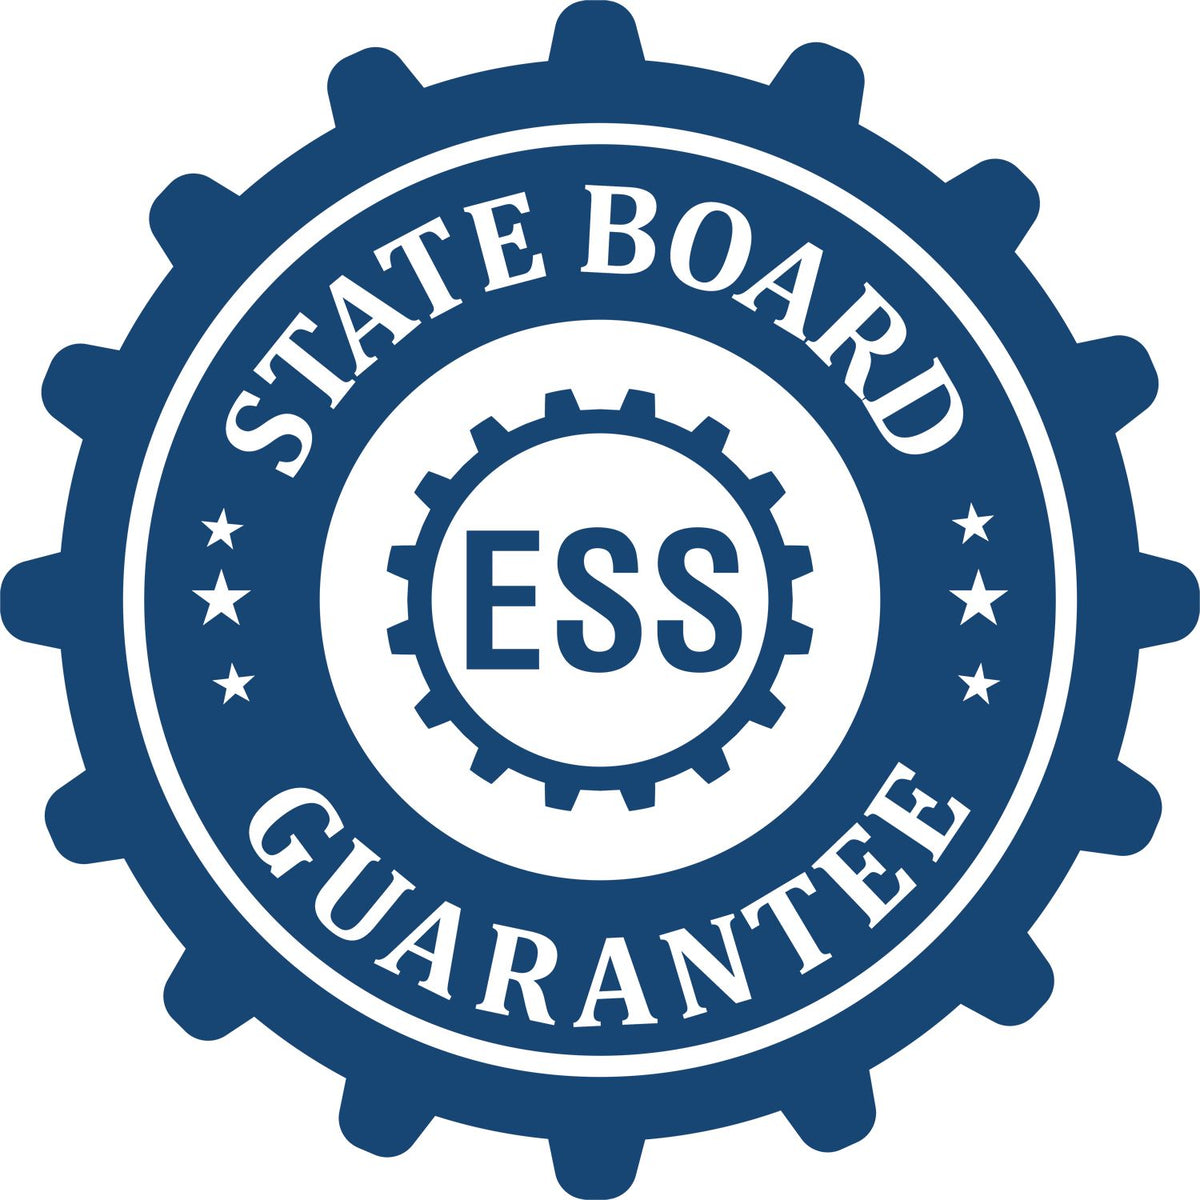 An emblem in a gear shape illustrating a state board guarantee for the State of Indiana Extended Long Reach Engineer Seal product.